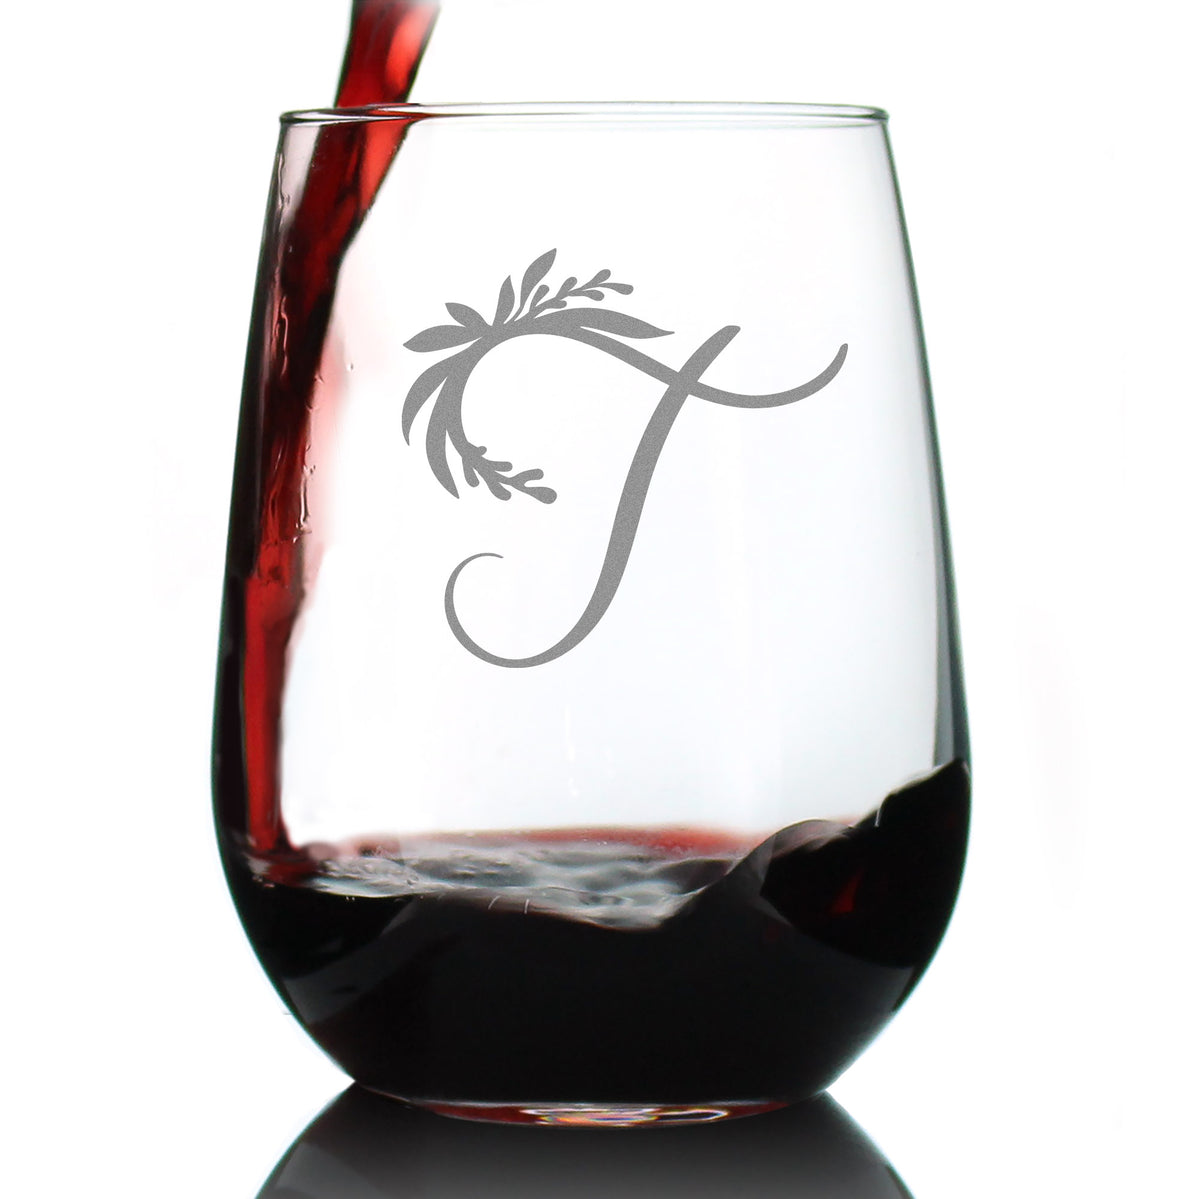 Monogram Floral Letter T - Stemless Wine Glass - Personalized Gifts for Women and Men - Large Engraved 17 Oz Glasses